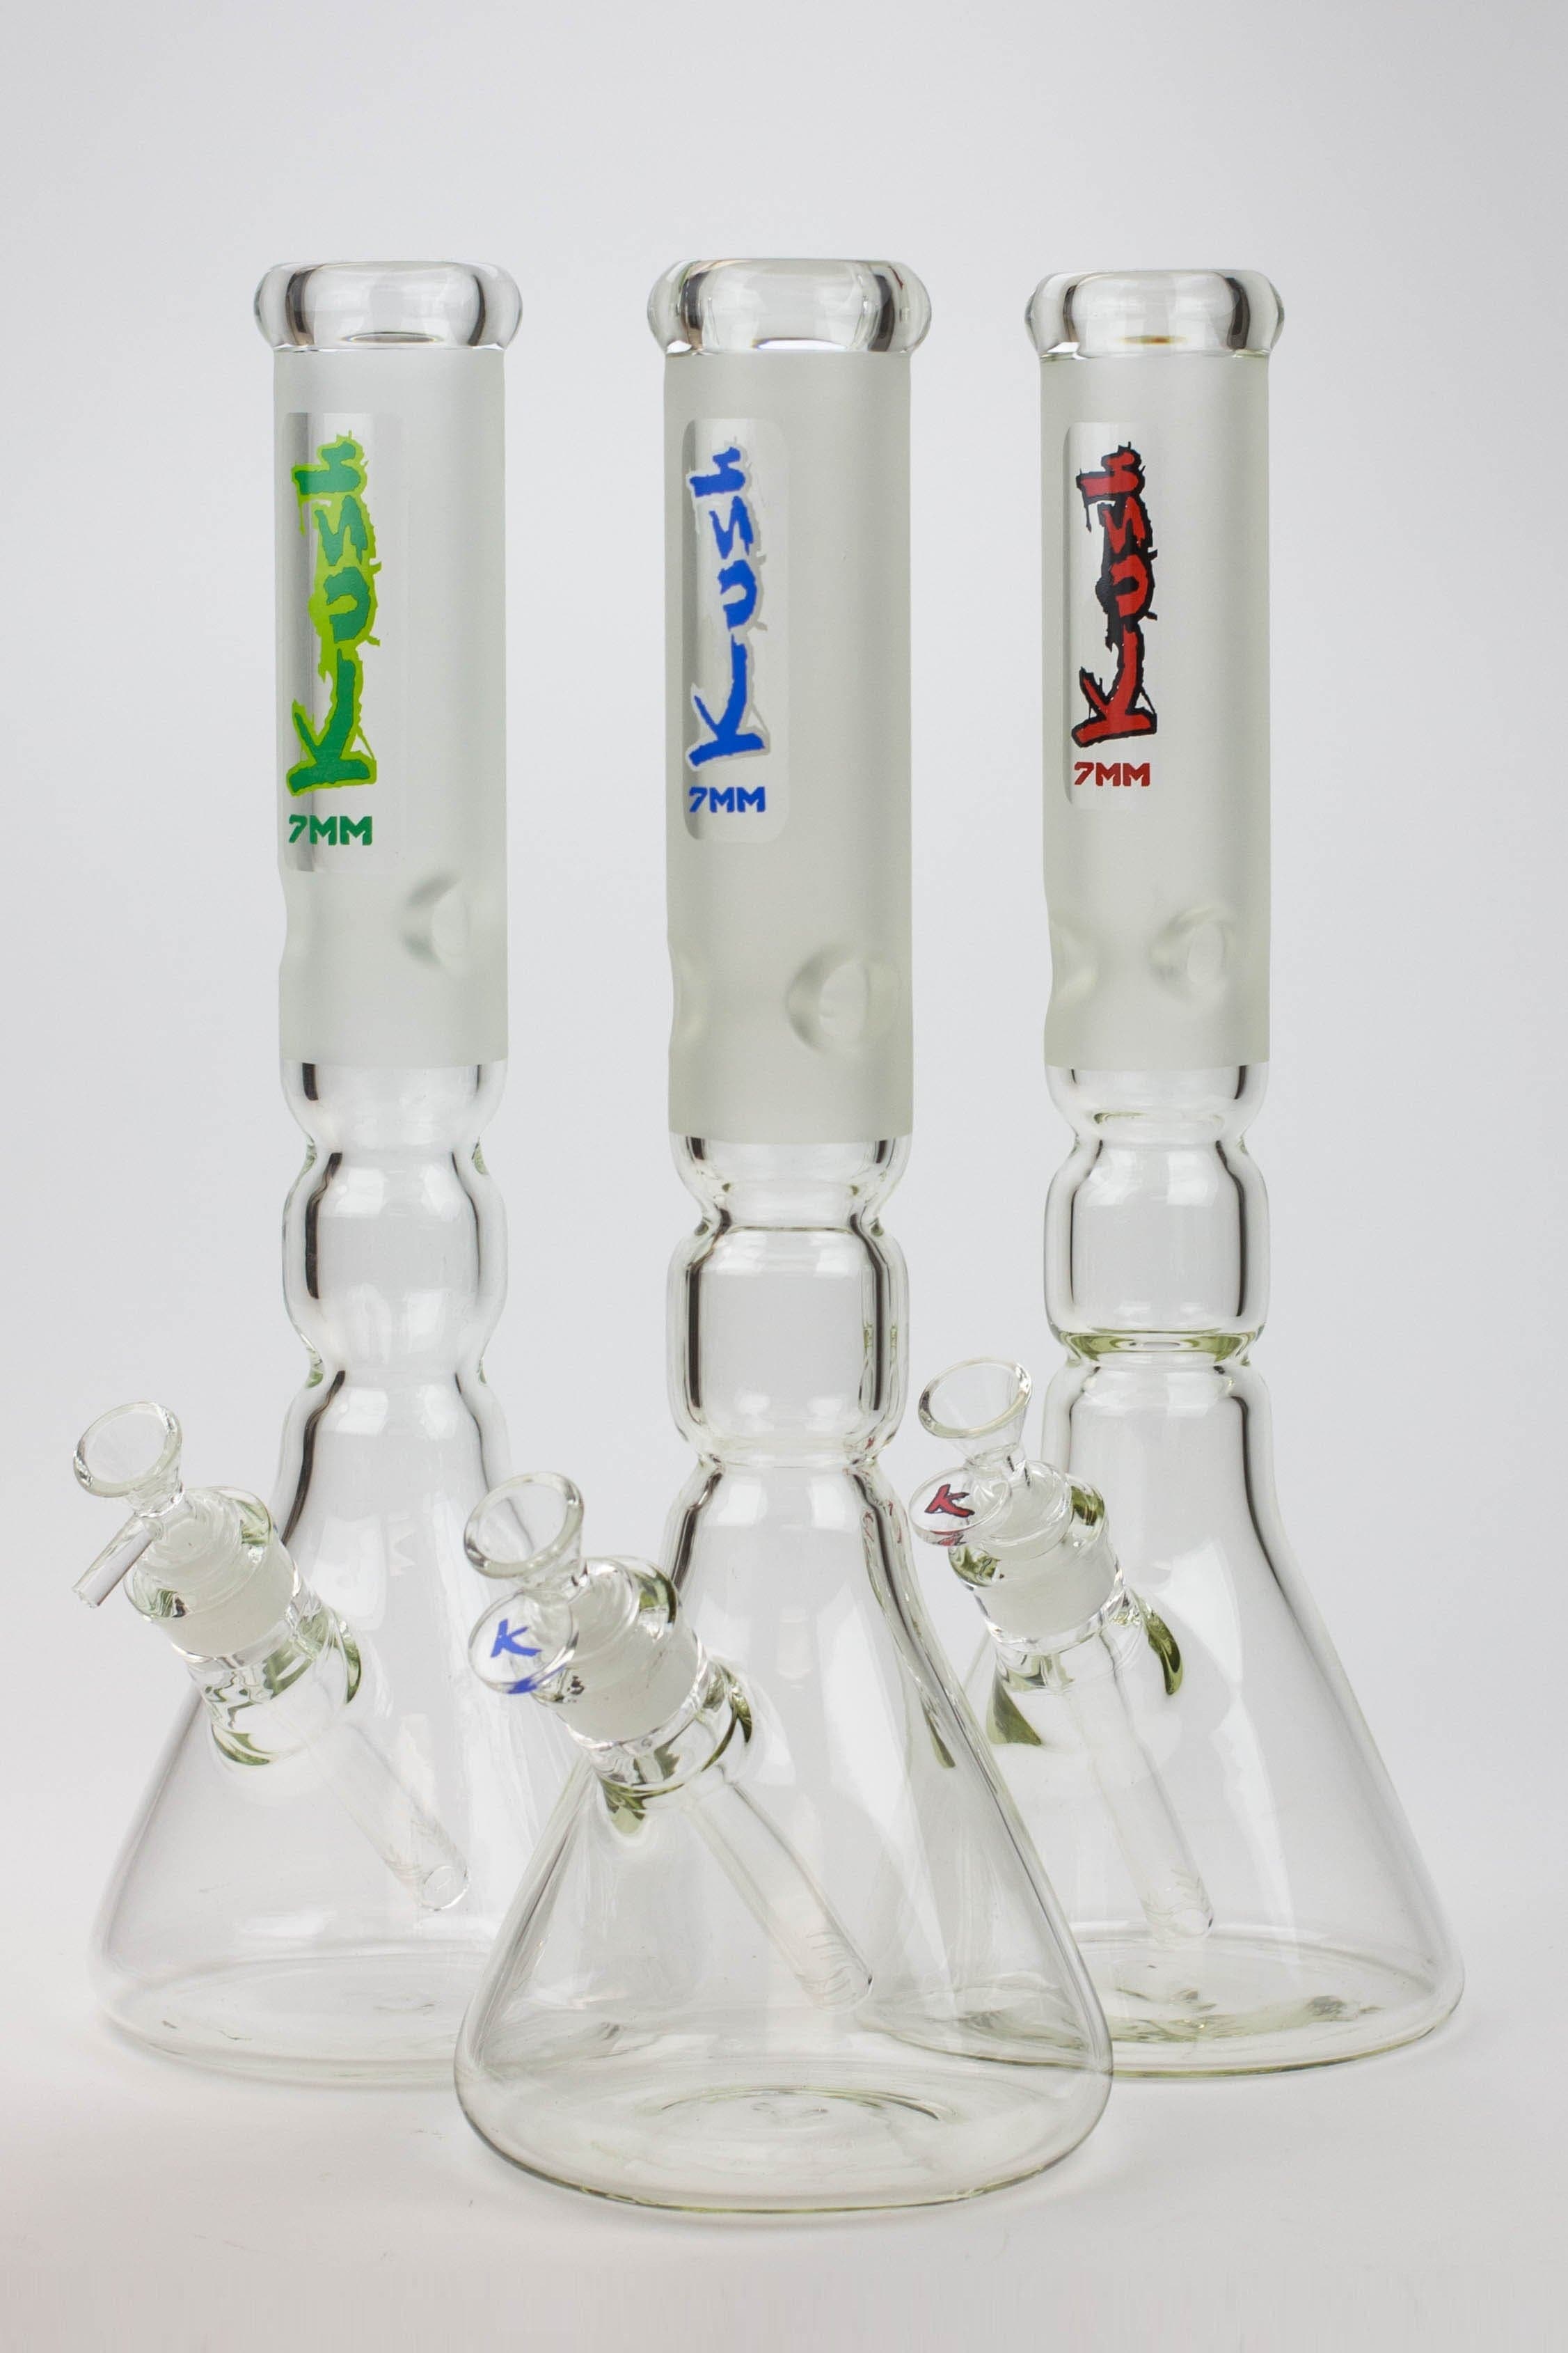 Kush curved tube glass water pipes_0